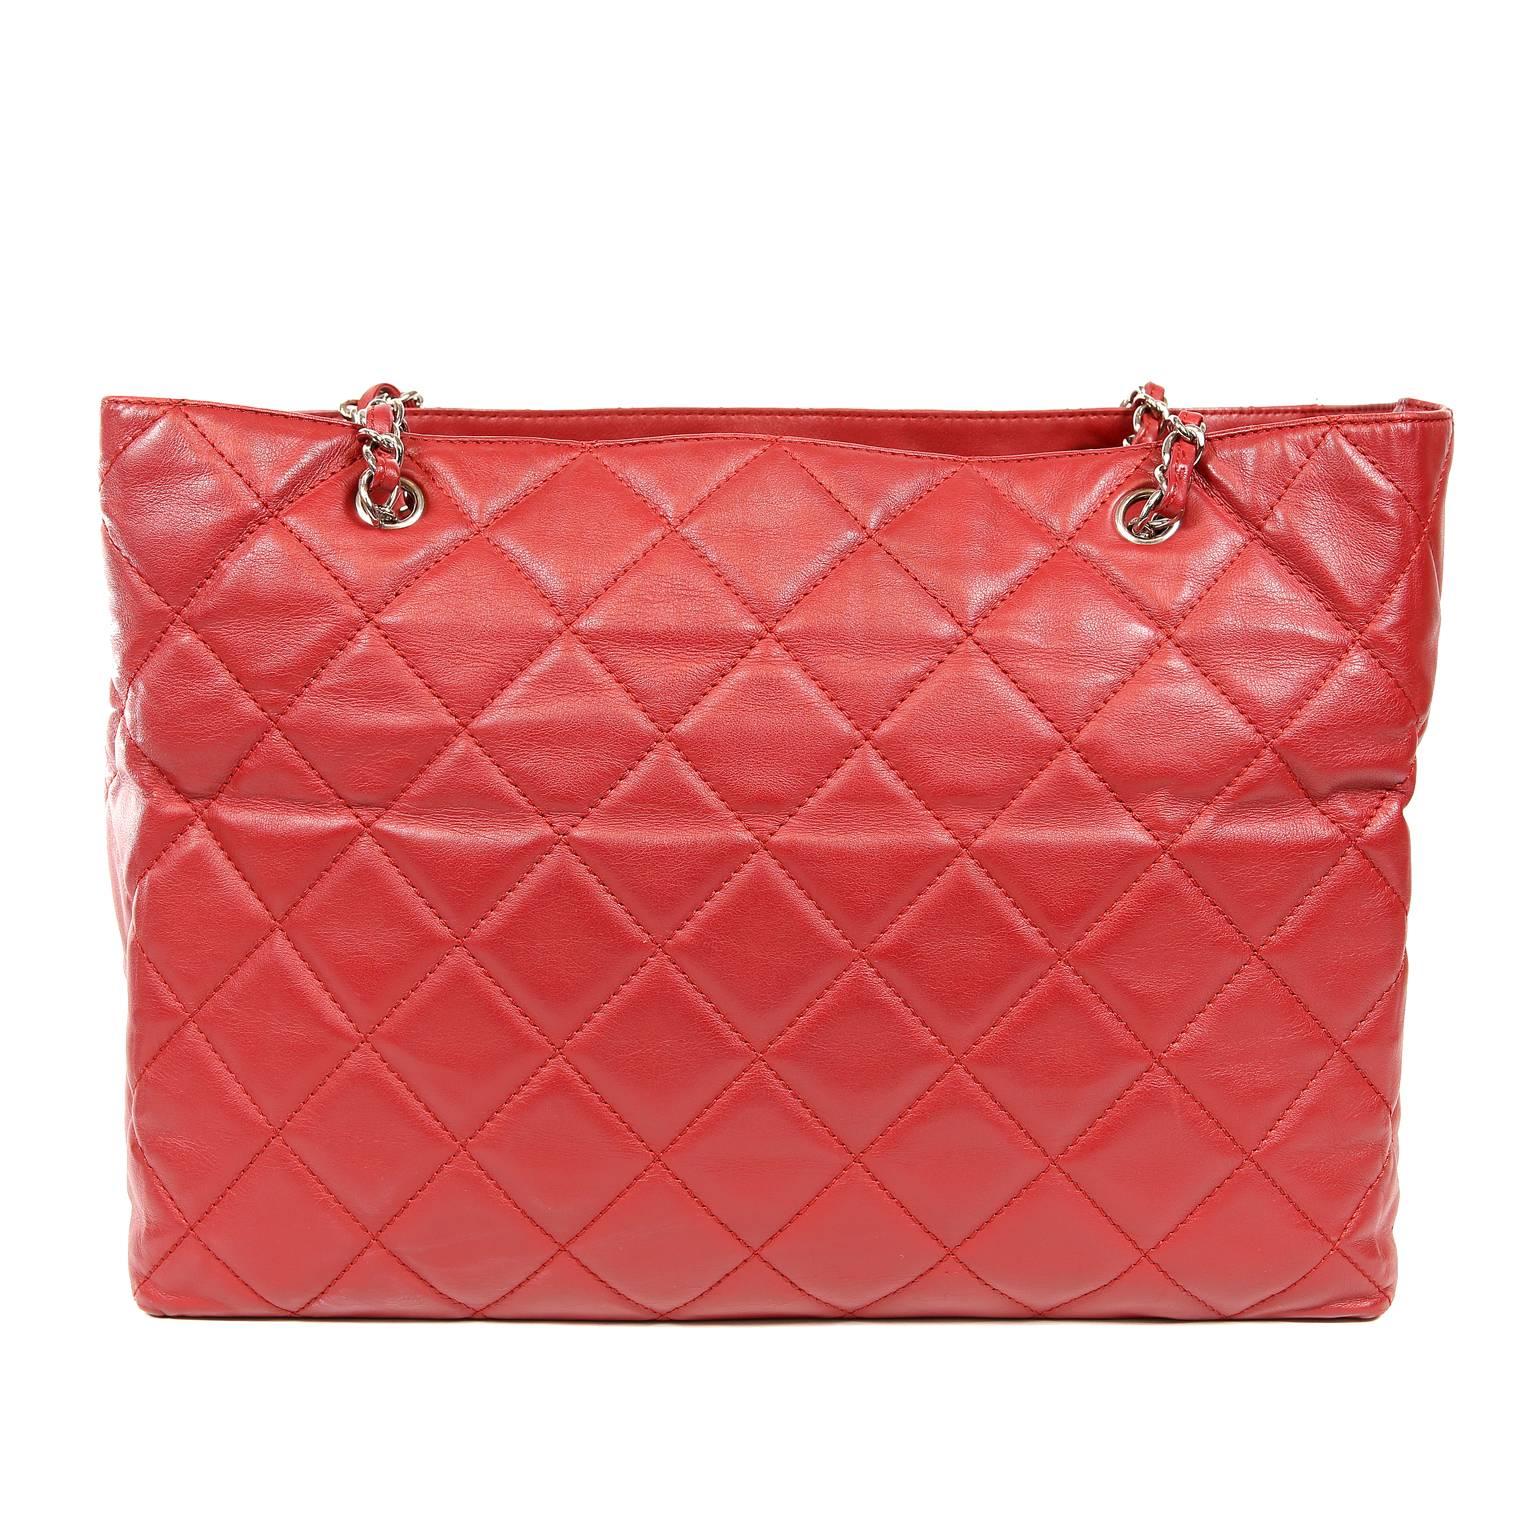 Chanel Red Leather XXL Tote- MINT Condition
Perfect for chic day wear or travel, this XXL Red Leather Tote from Chanel is a beautiful piece in pristine condition.
Red leather is quilted in signature Chanel diamond pattern.  Roomy front pocket and